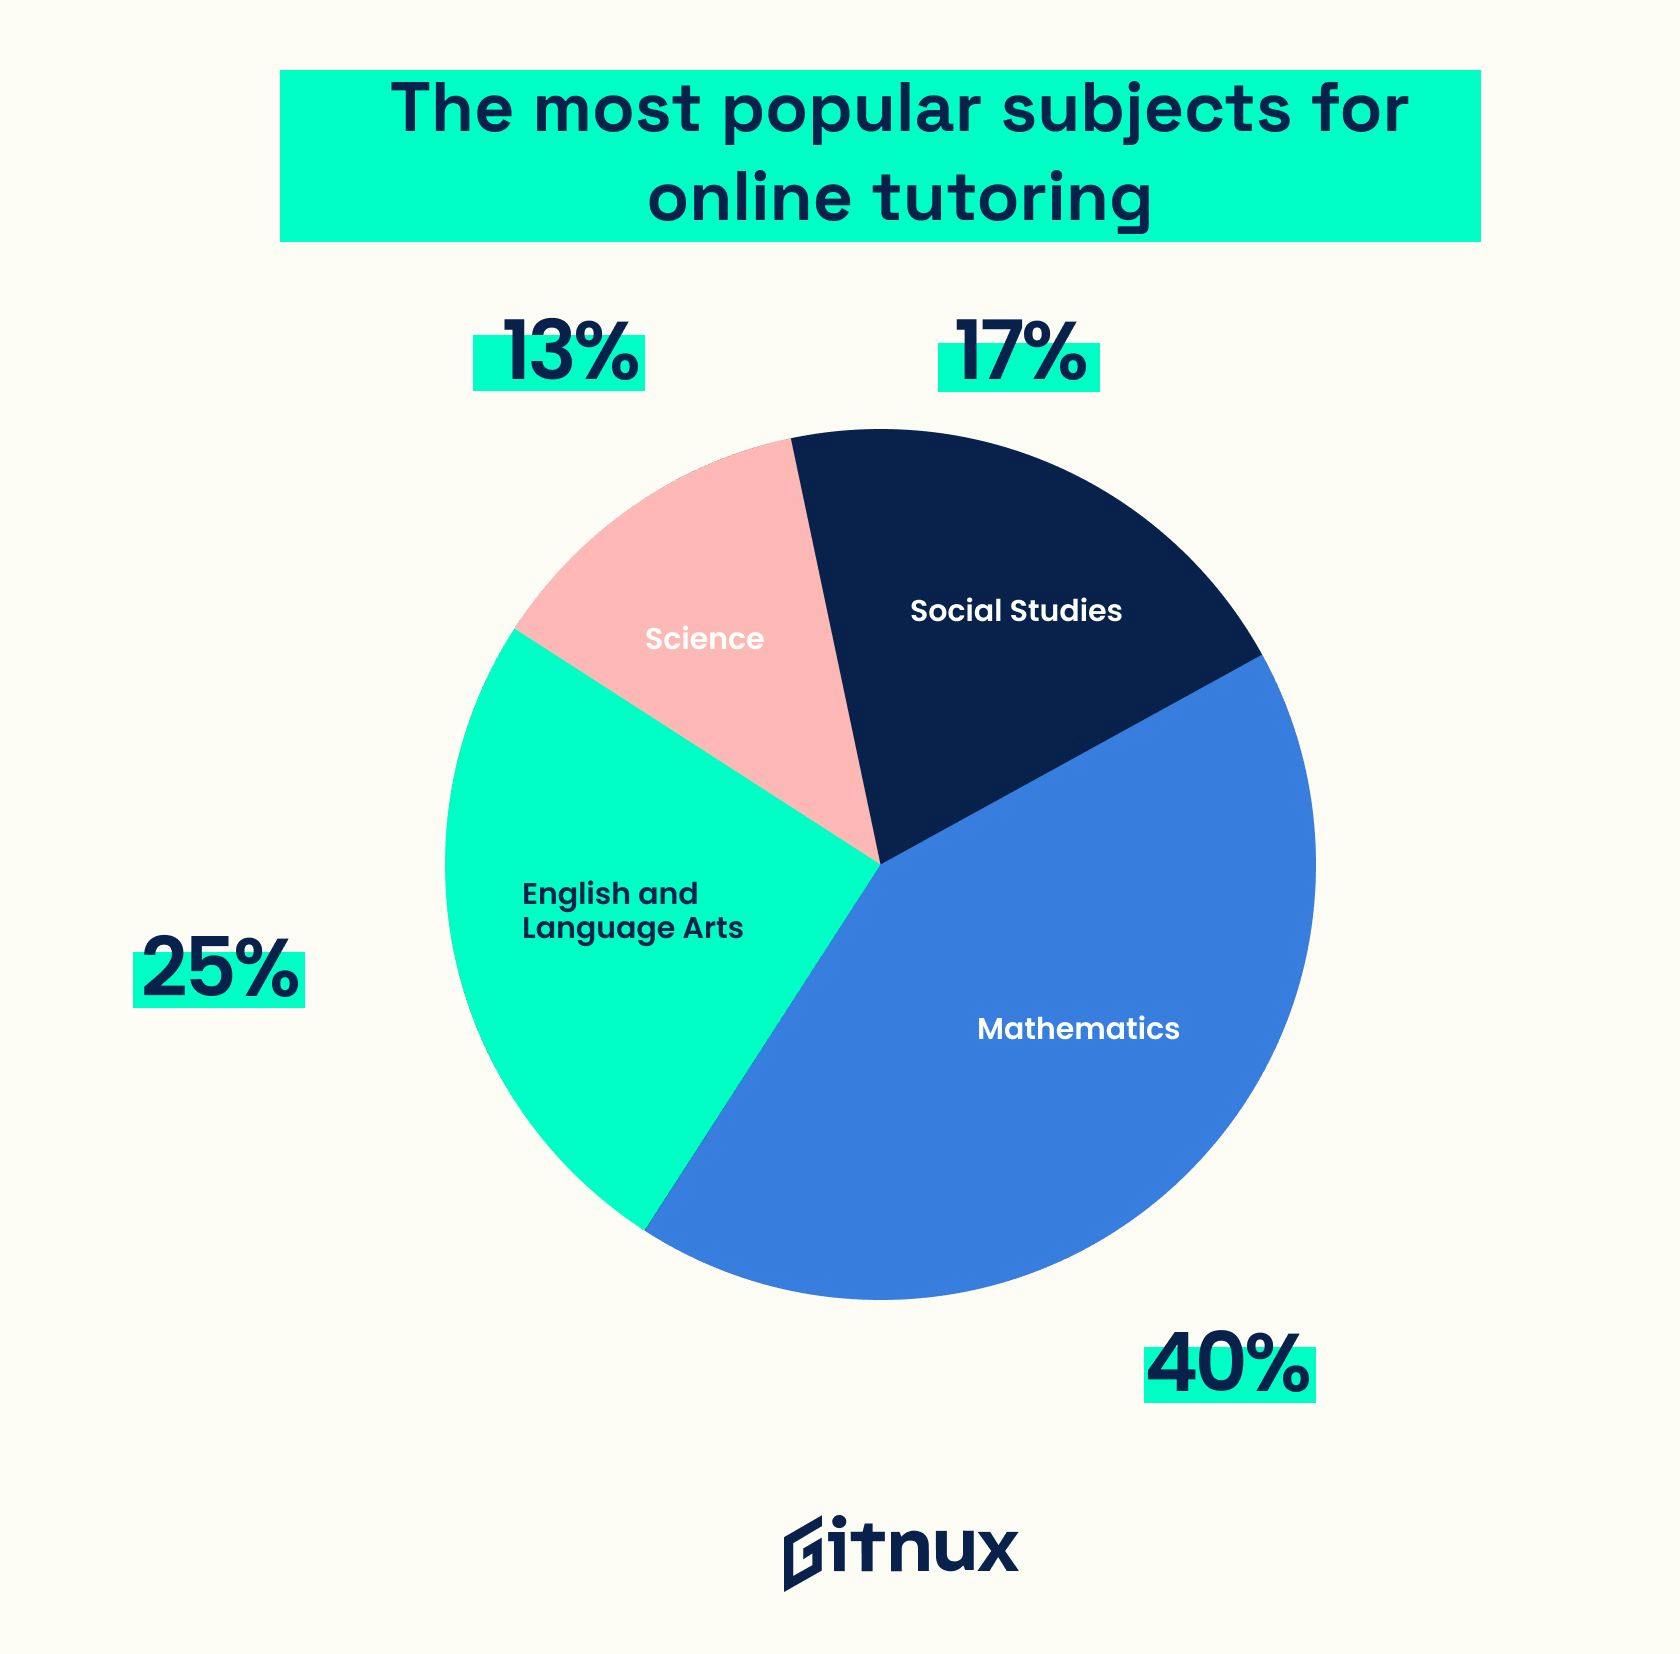 Most popular subjects for online tutoring